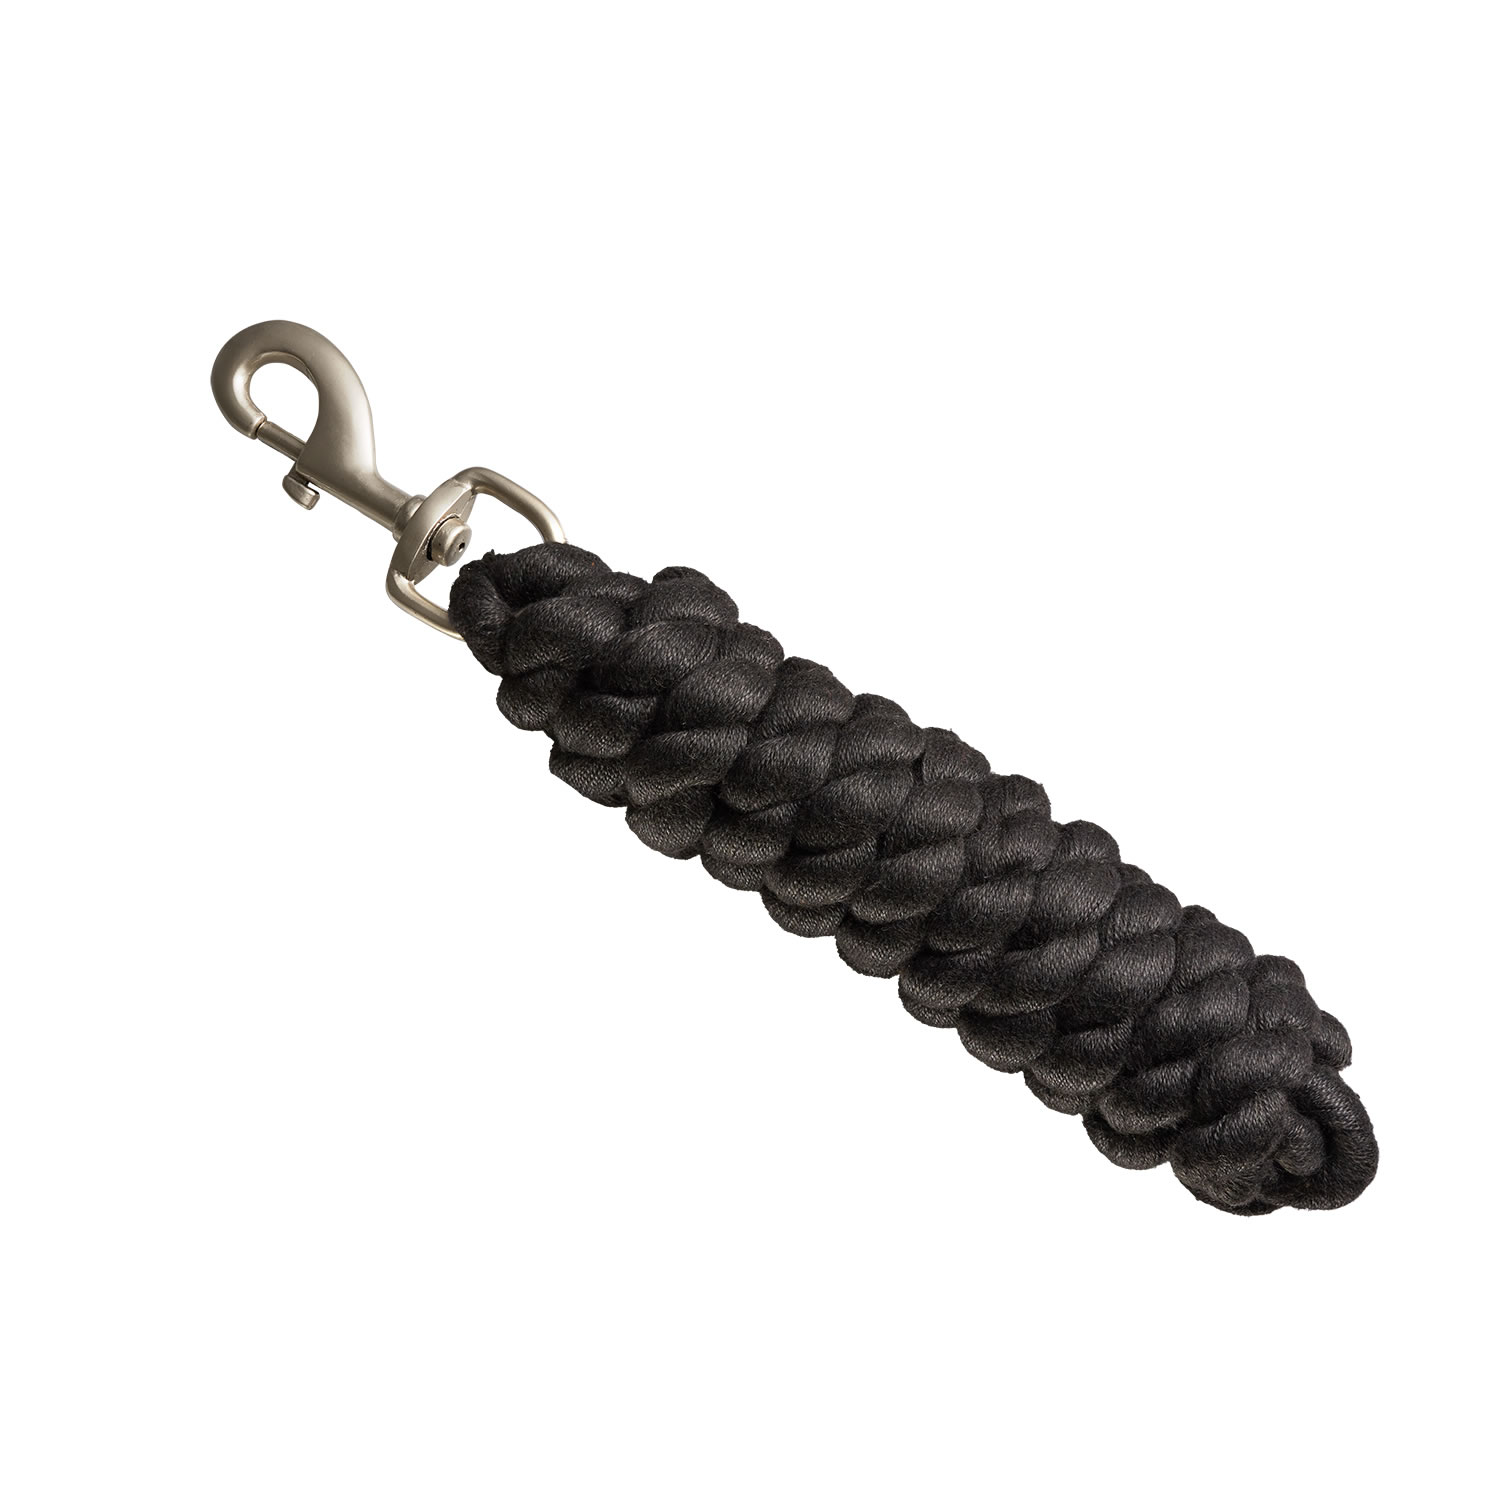 BITZ BASIC LEAD ROPE WITH TRIGGER CLIP BLACK